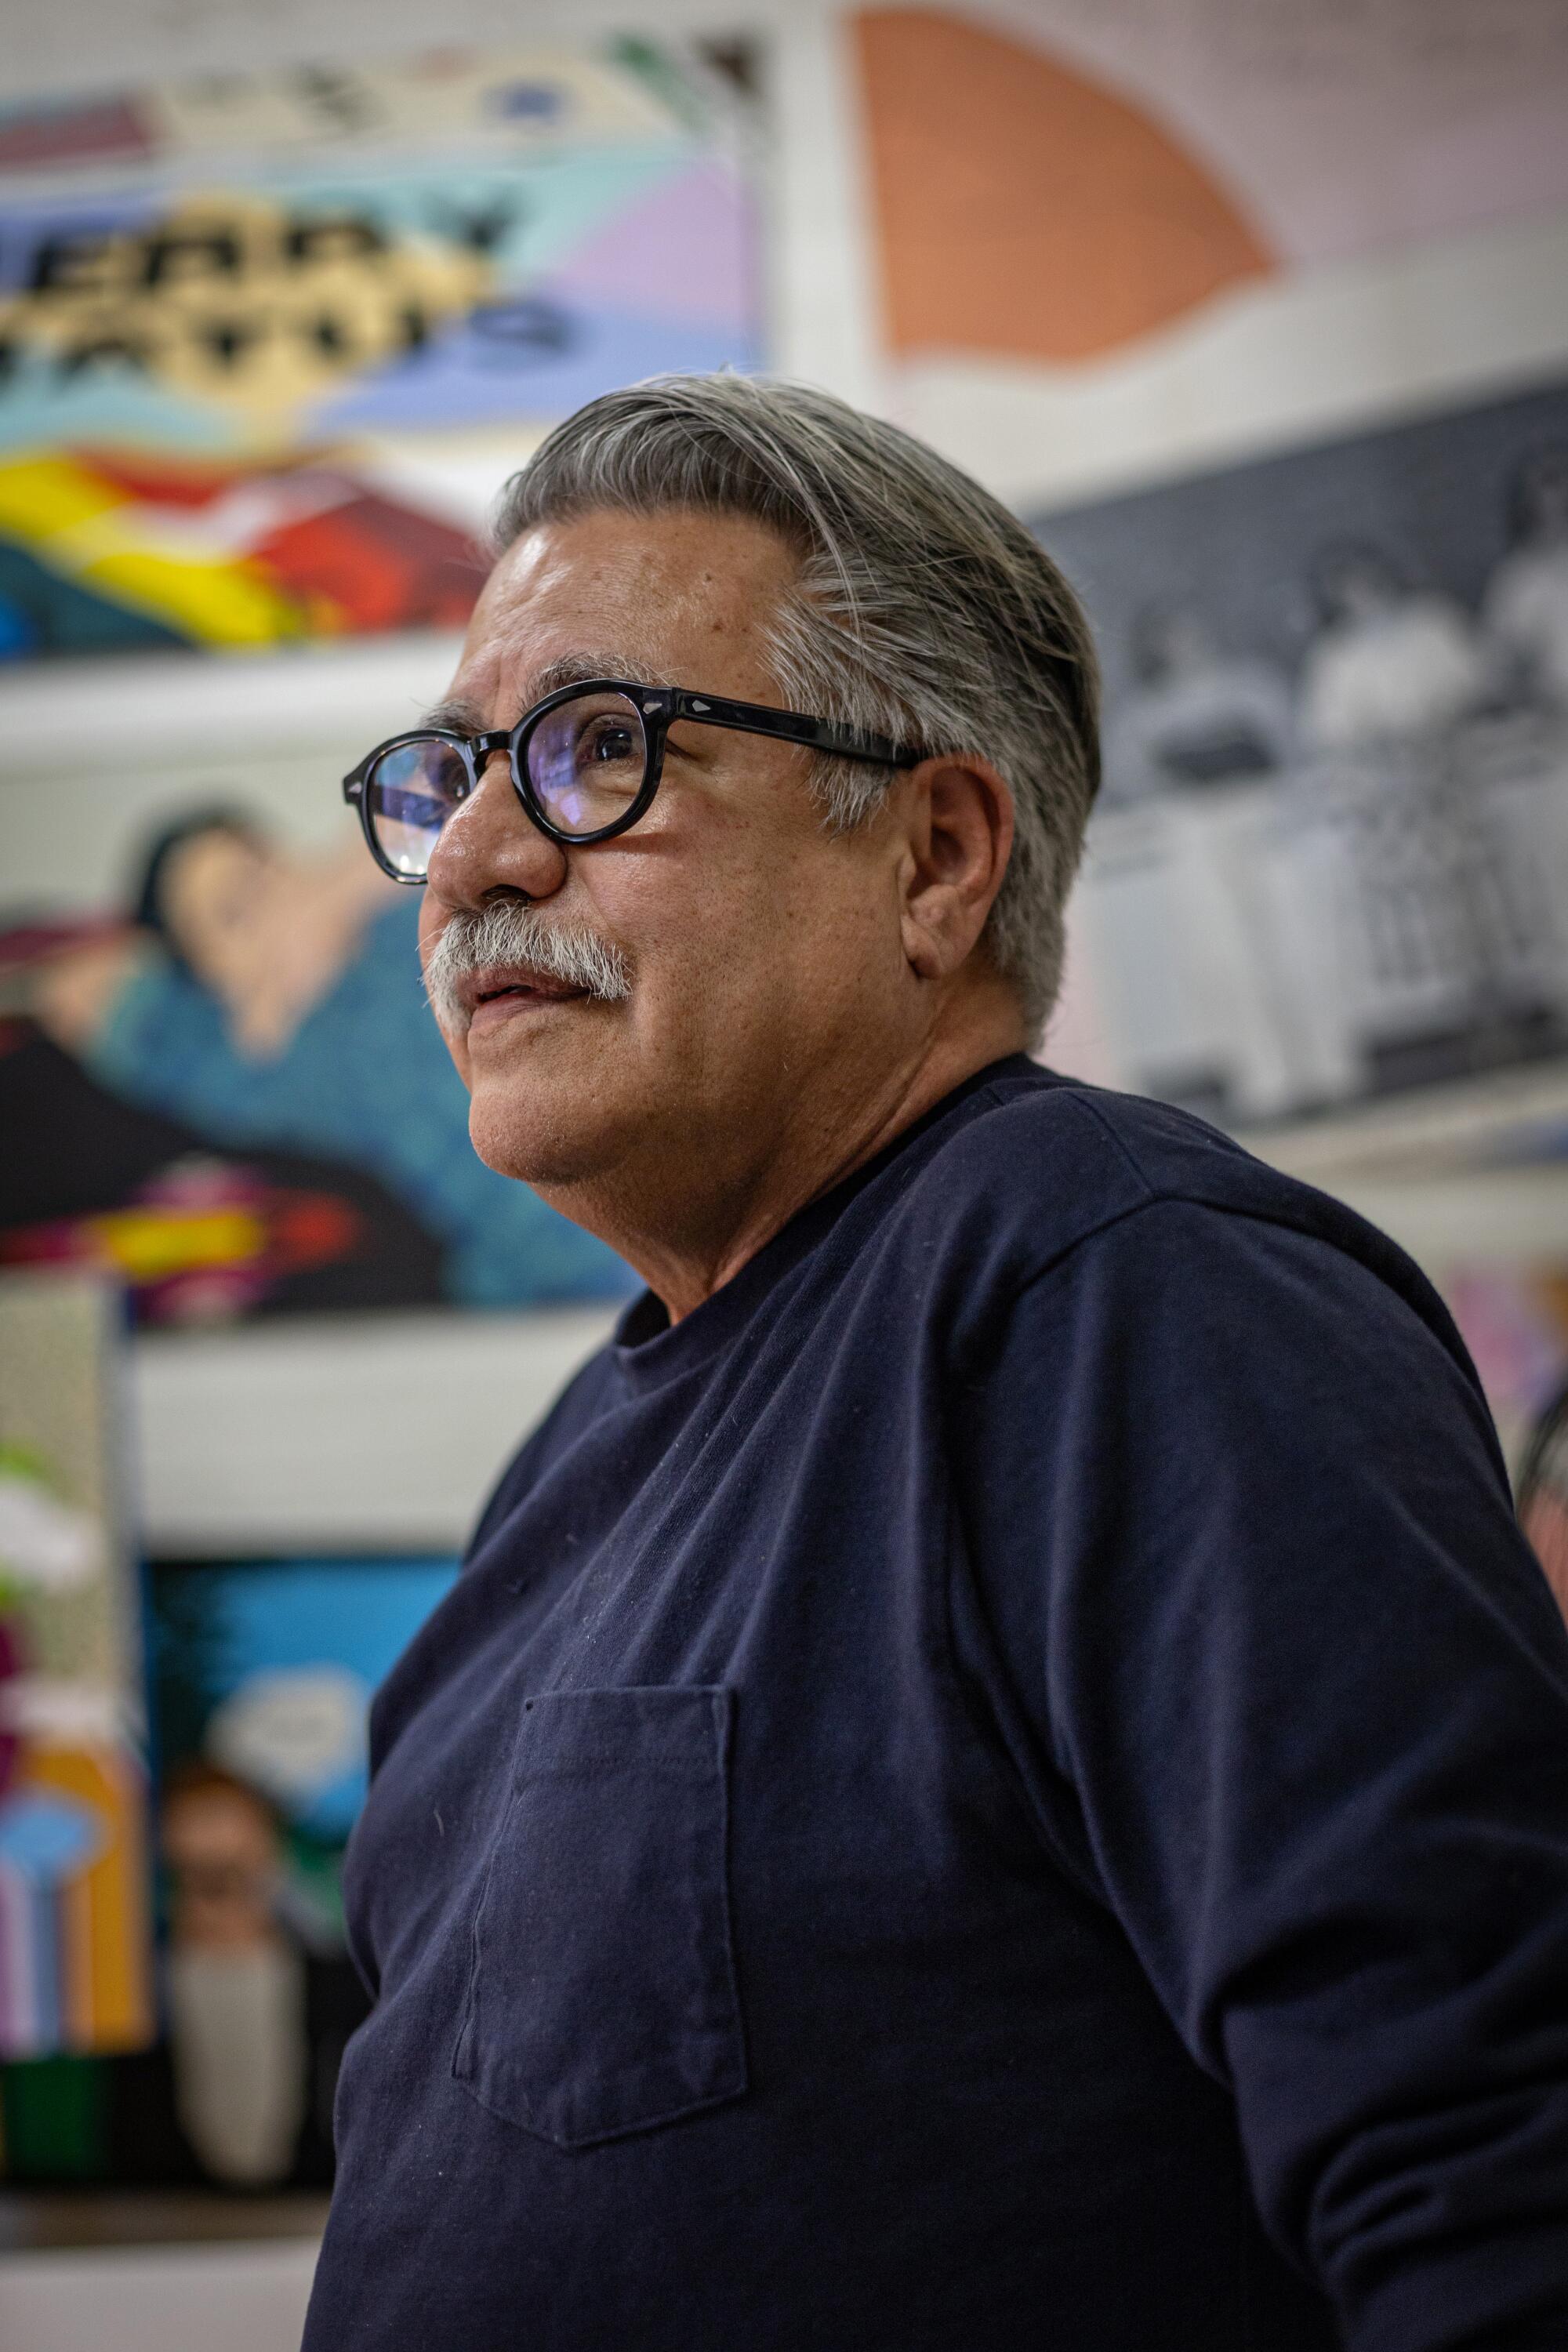 Joey Terrill, a 68-year-old Chicano man wearing a dark shirt, is surrounded by bright paintings in a studio.